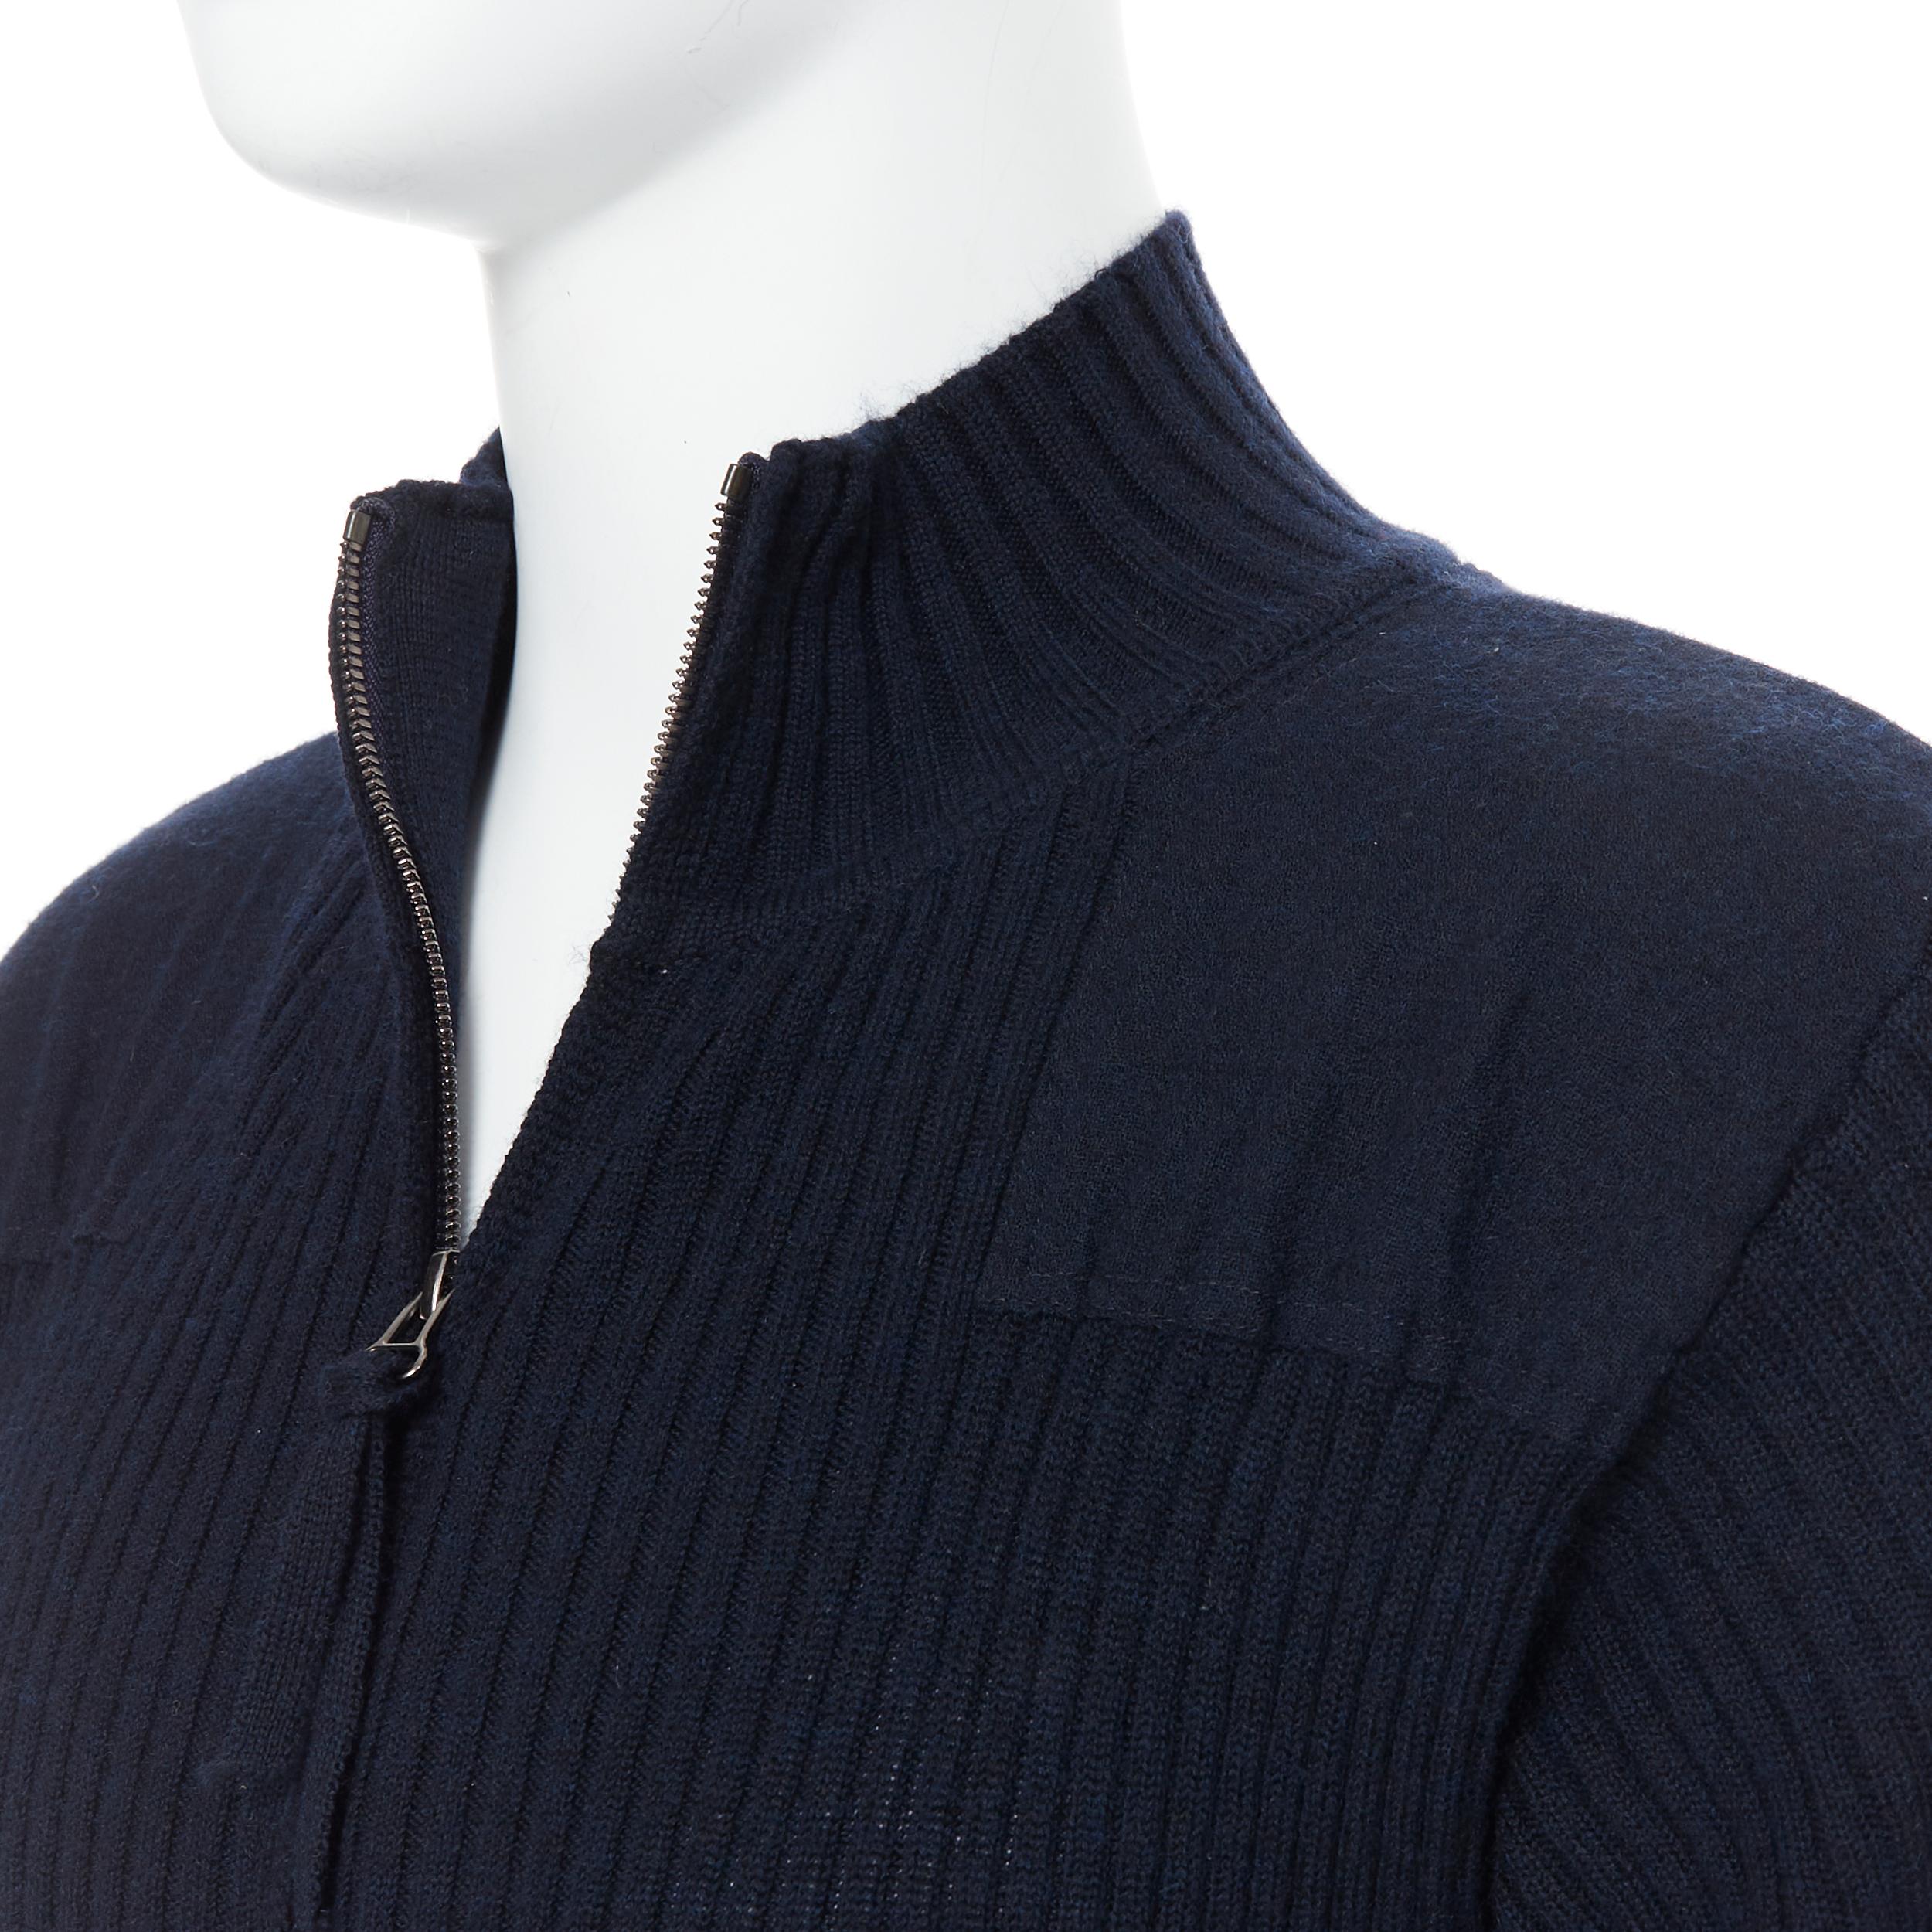 45R 100% wool navy blue ribbed knit zip military patch cardigan sweater JP4 S 
Reference: PRCN/A00066 
Brand: 45R 
Material: Wool 
Color: Navy 
Pattern: Solid 
Closure: Zip 
Extra Detail: 100% wool. Navy blue. Ribbed knit. Military patch detailing